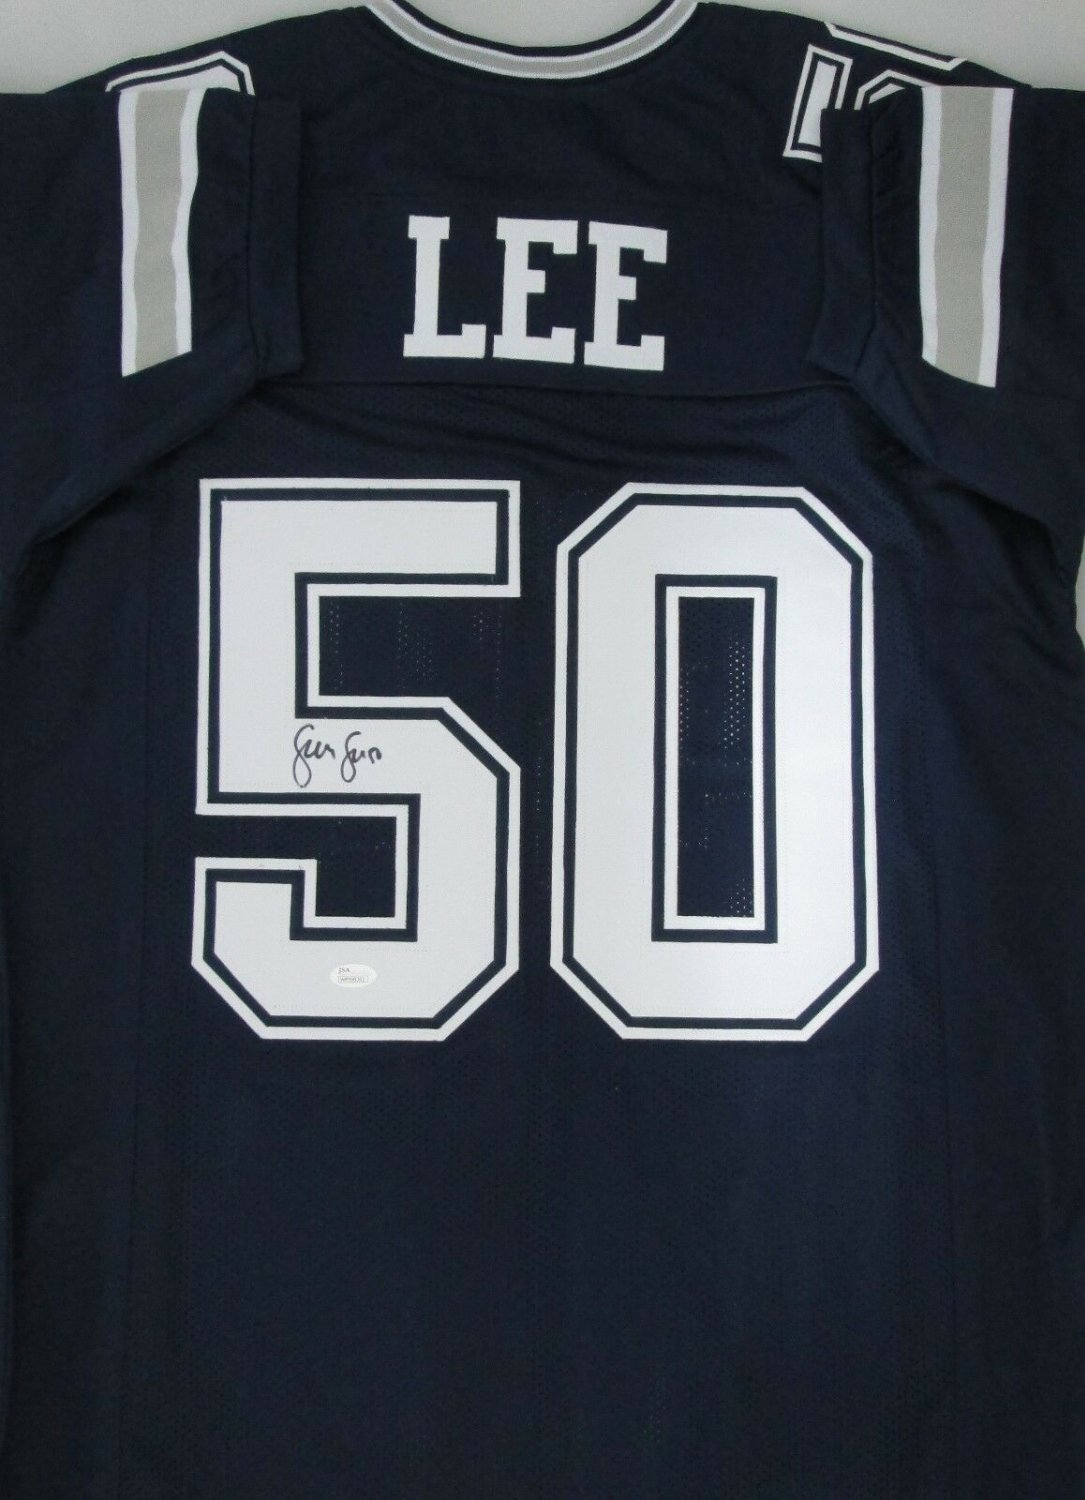 sean lee autographed jersey